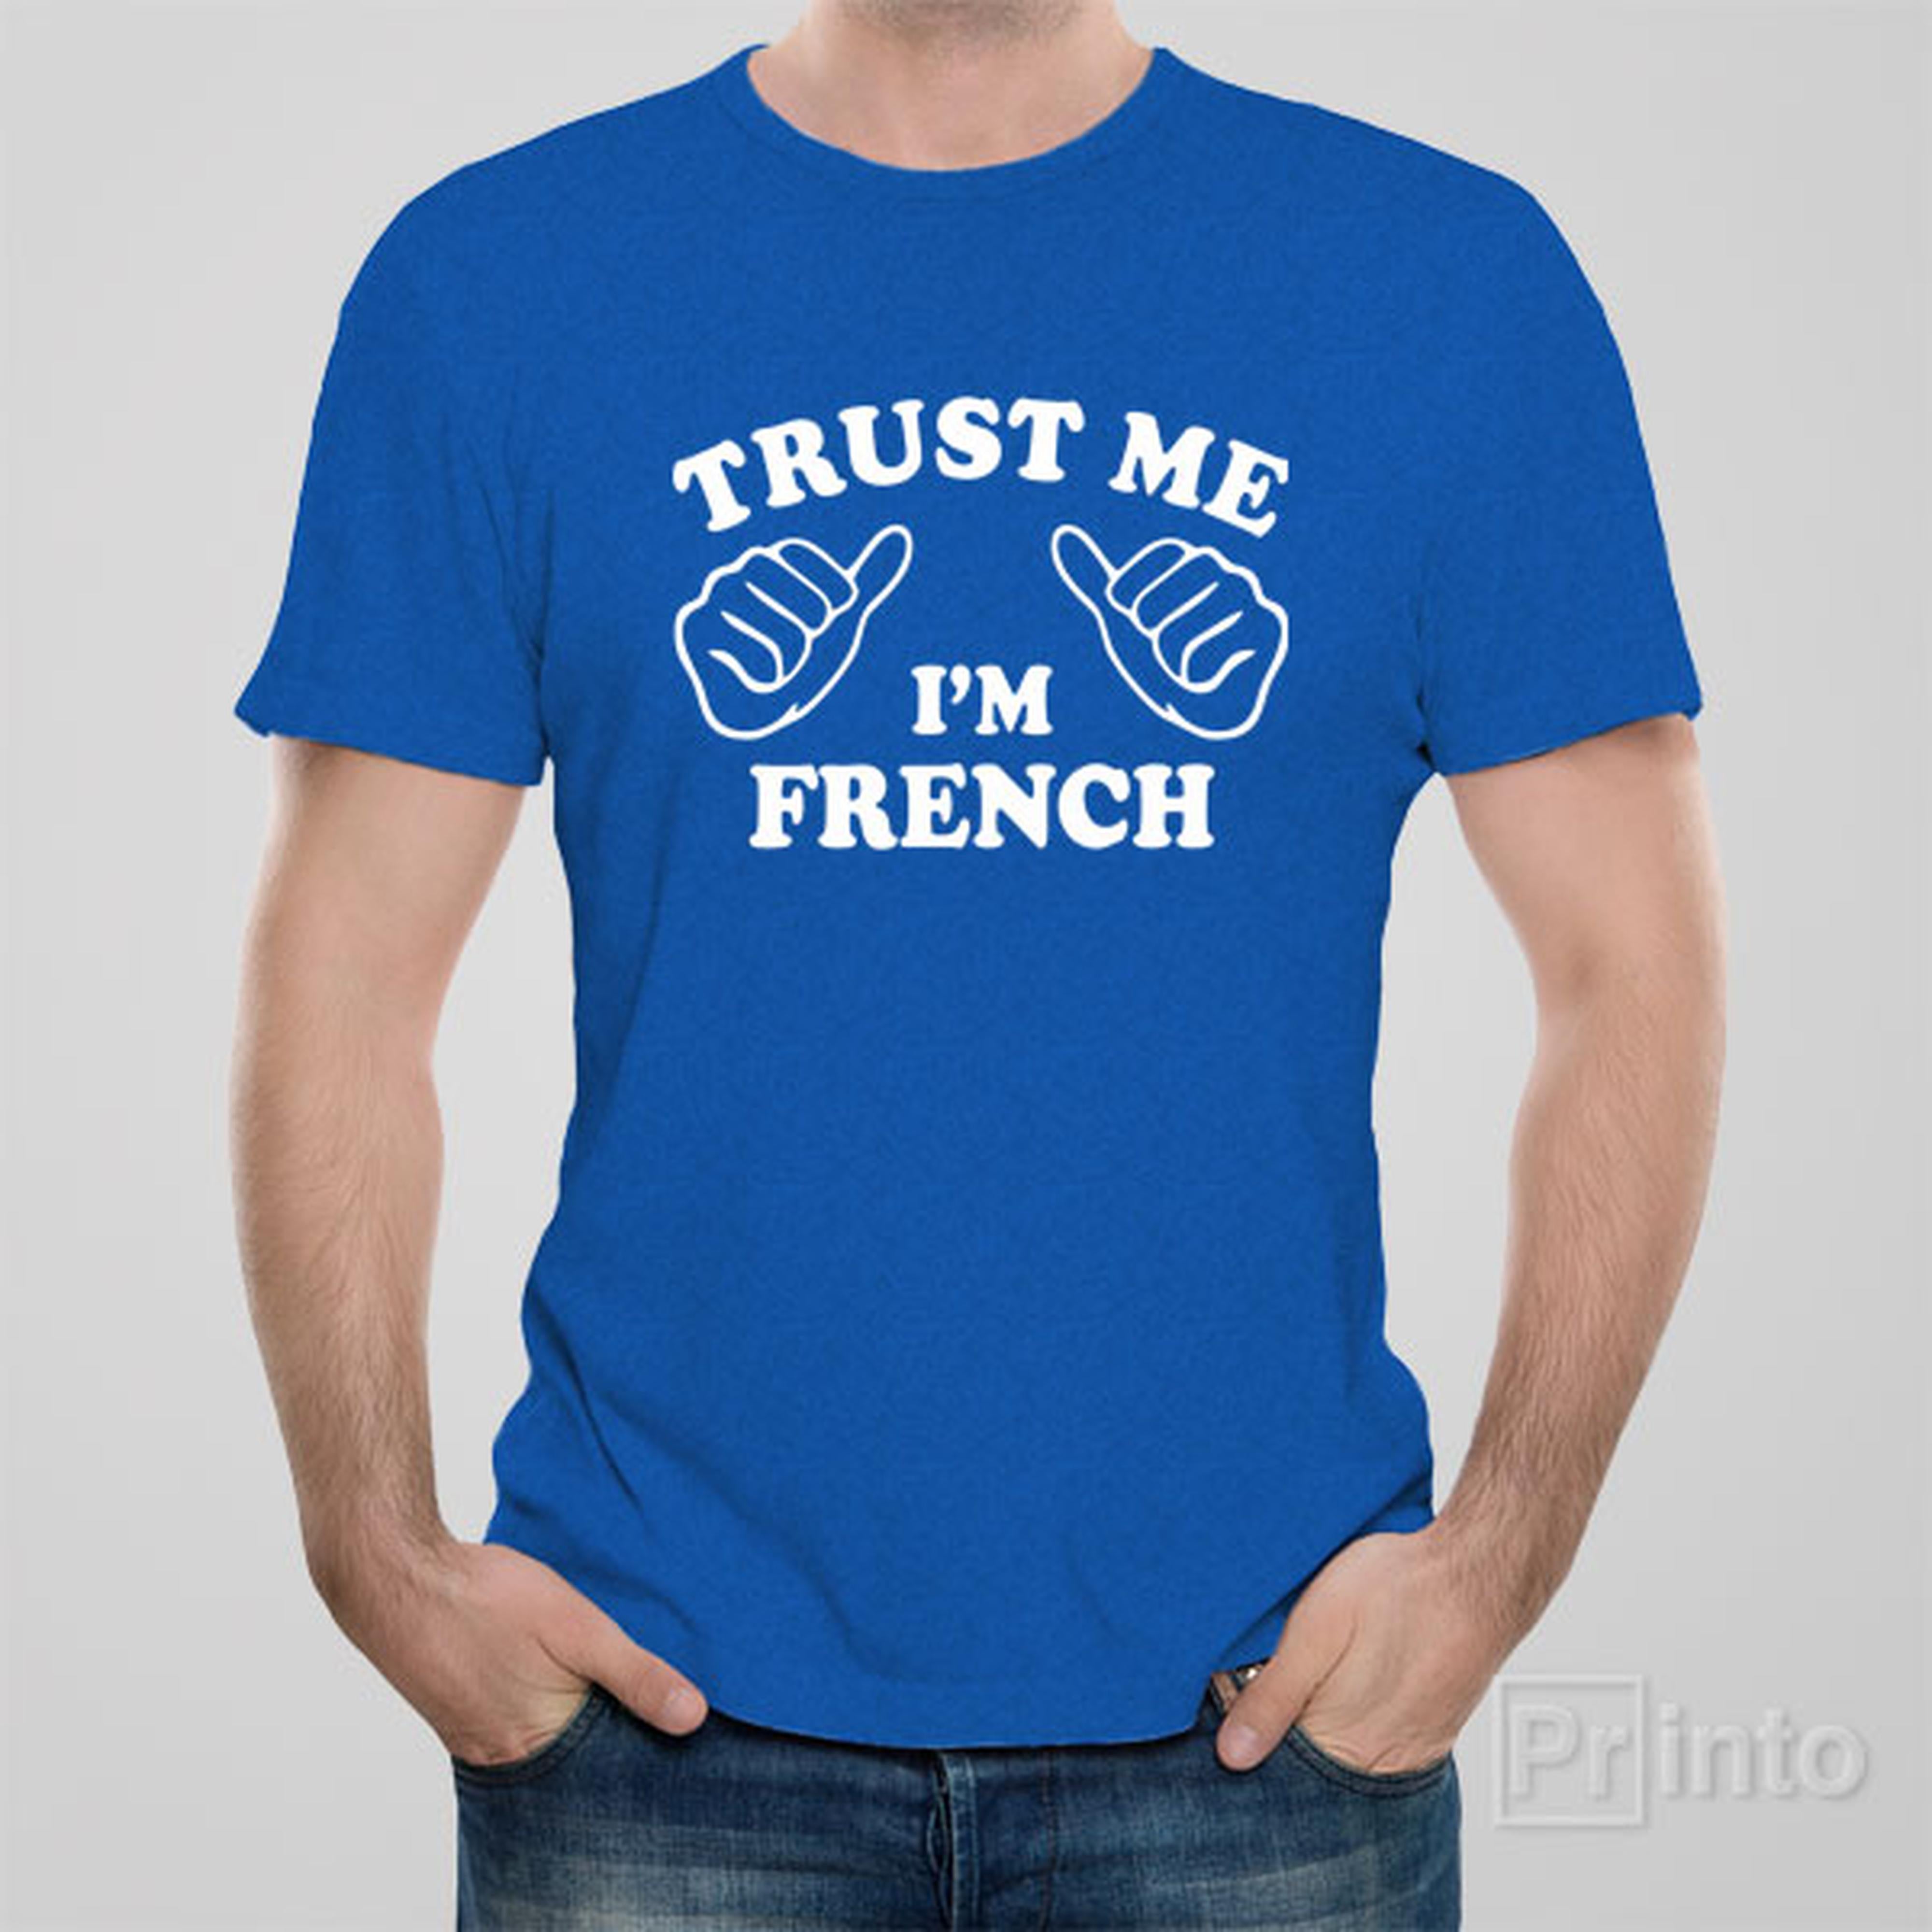 trust-me-i-am-french-t-shirt